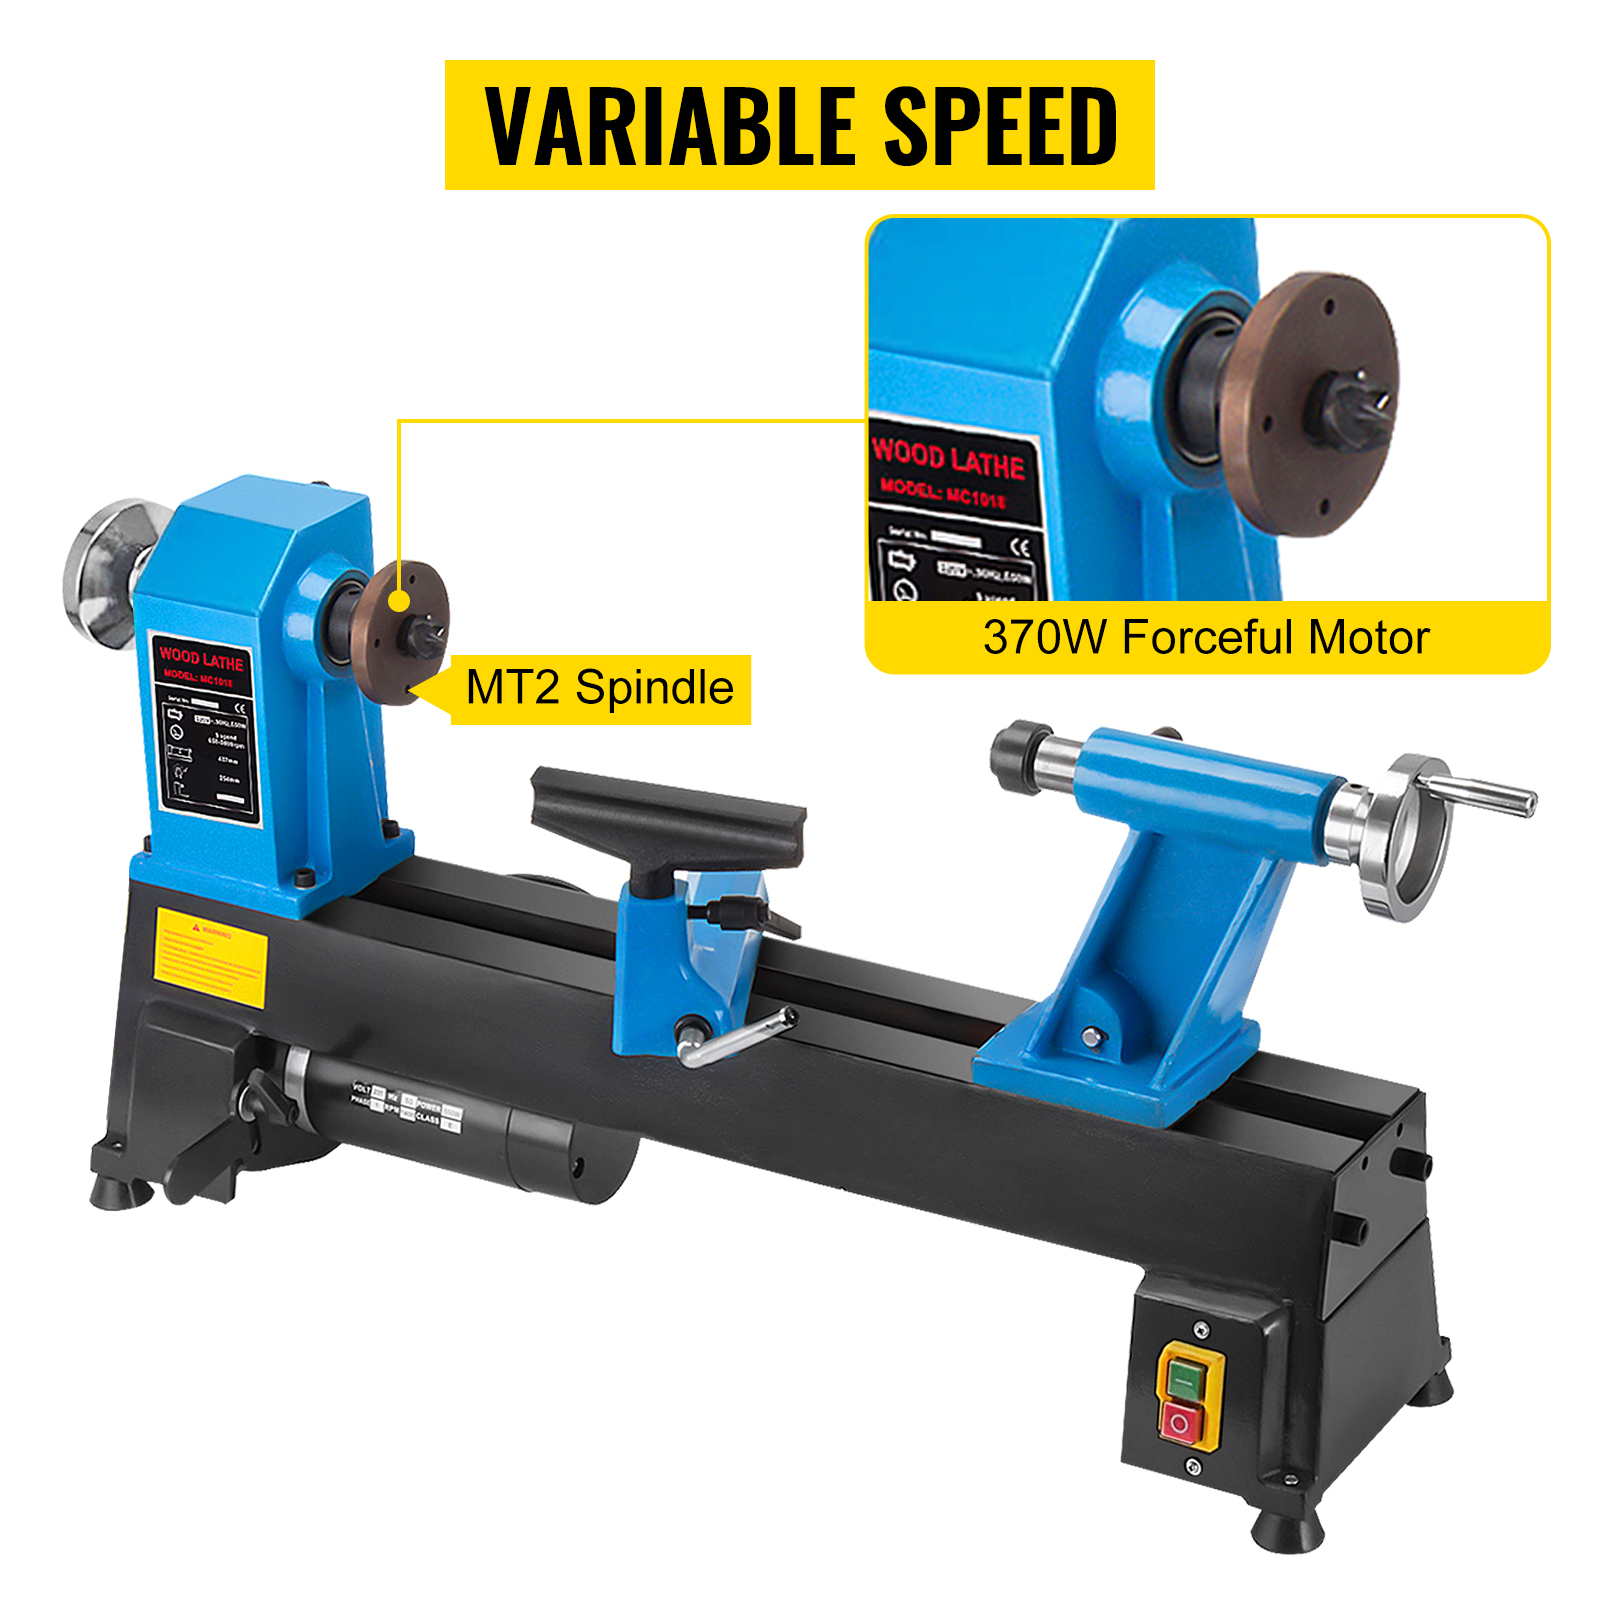 5 SPEED BENCH TOP WOOD LATHE 10" x 18" HEAVY DUTY CAST IRON UP to 3200 RPM's 